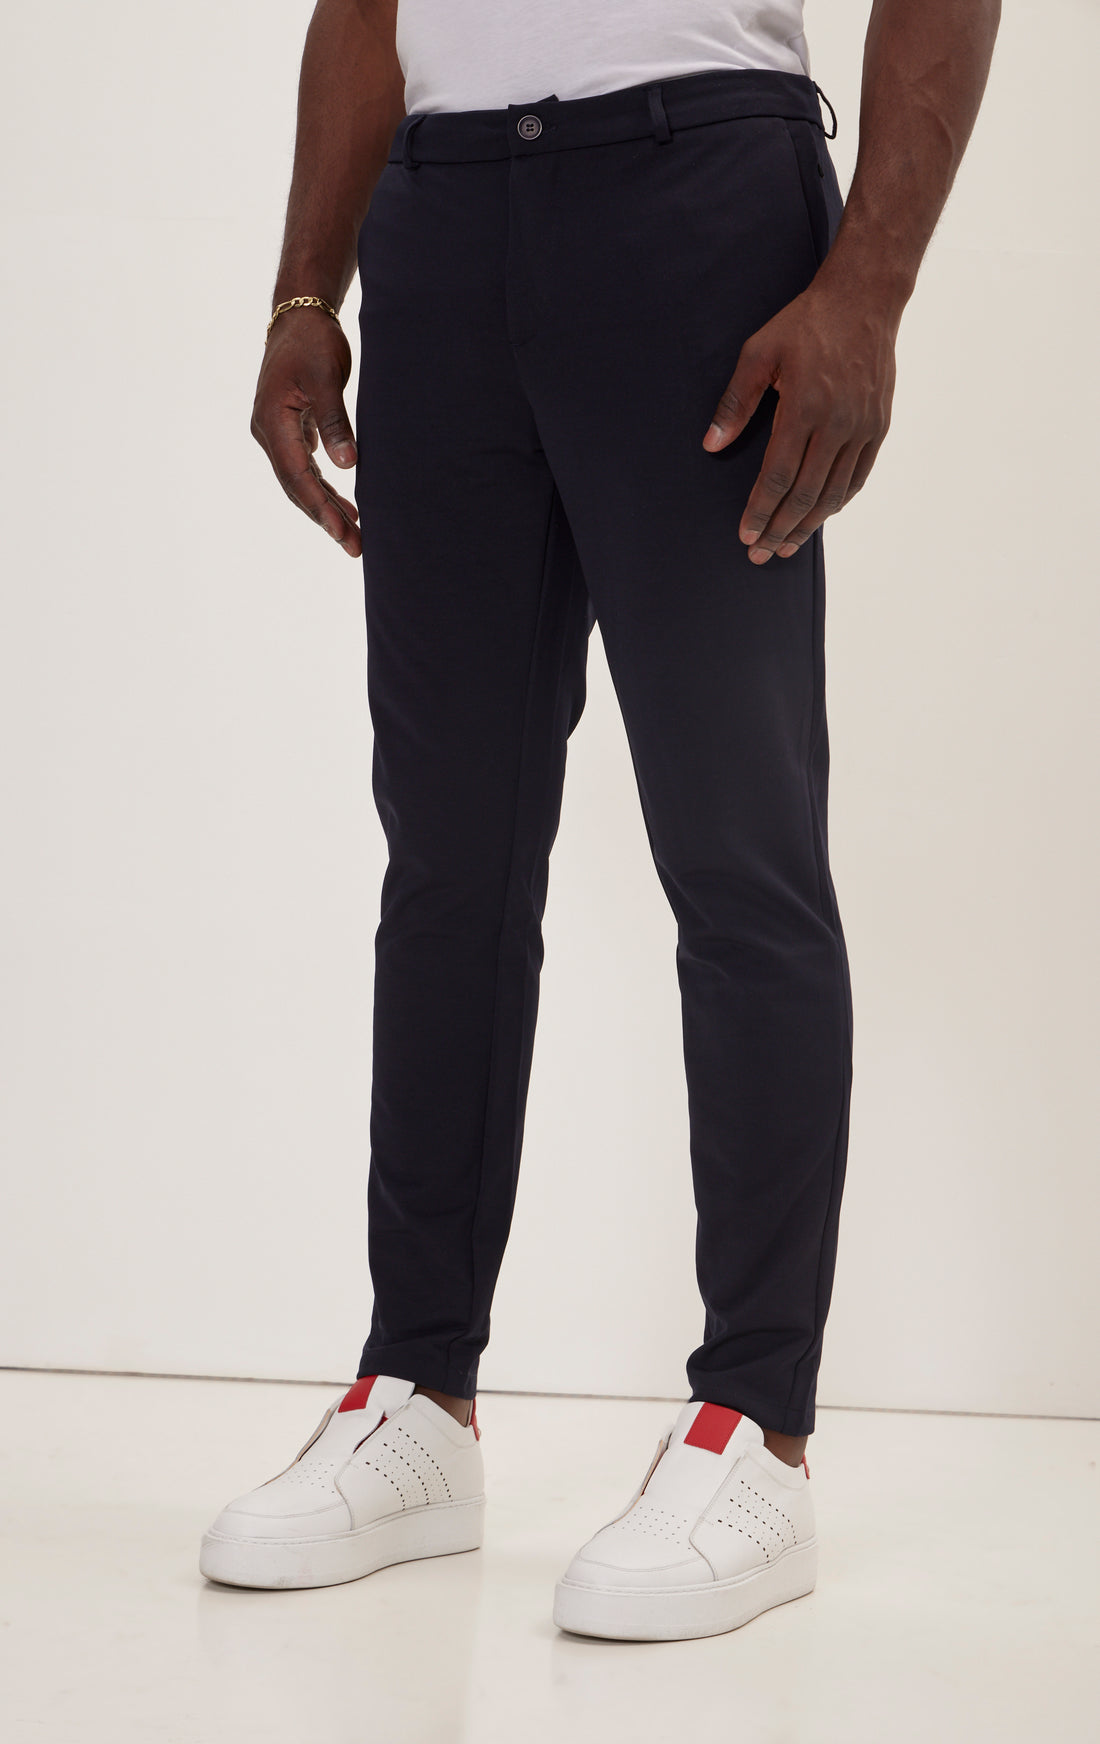 Tapered No-Wrinkle Tech Pants - Navy